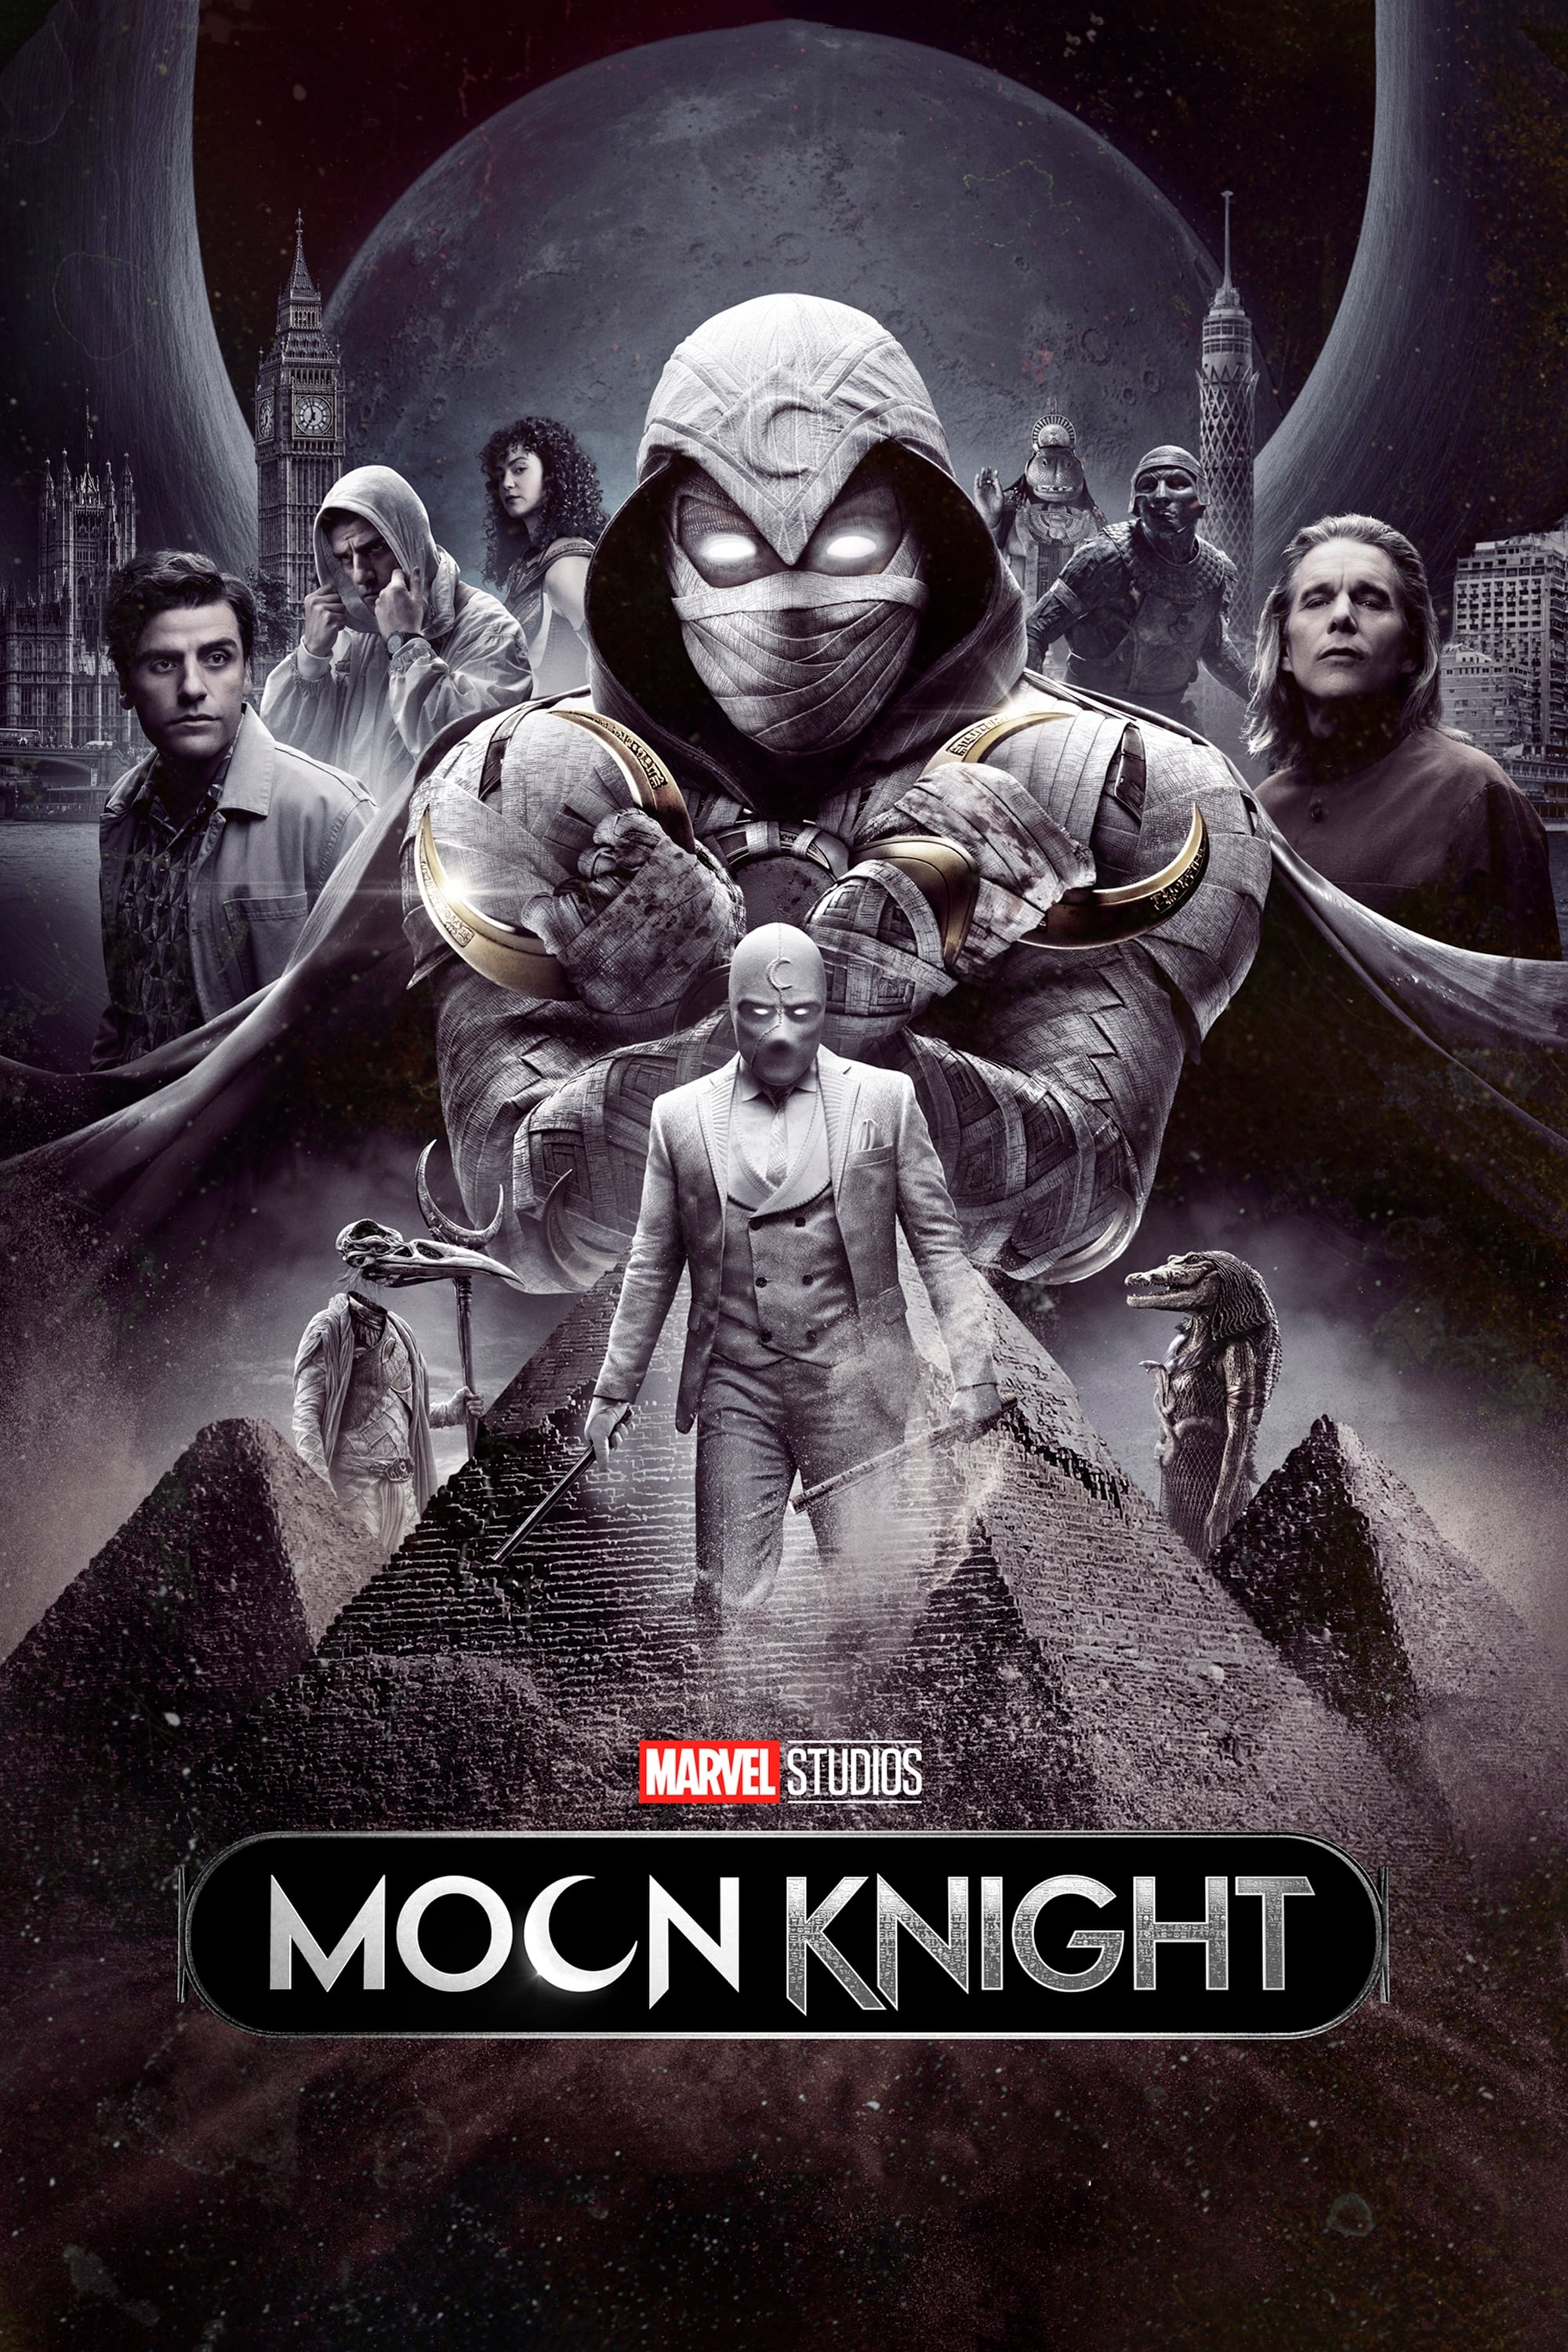 Moon Knight TV Shows About Dissociative Identity Disorder